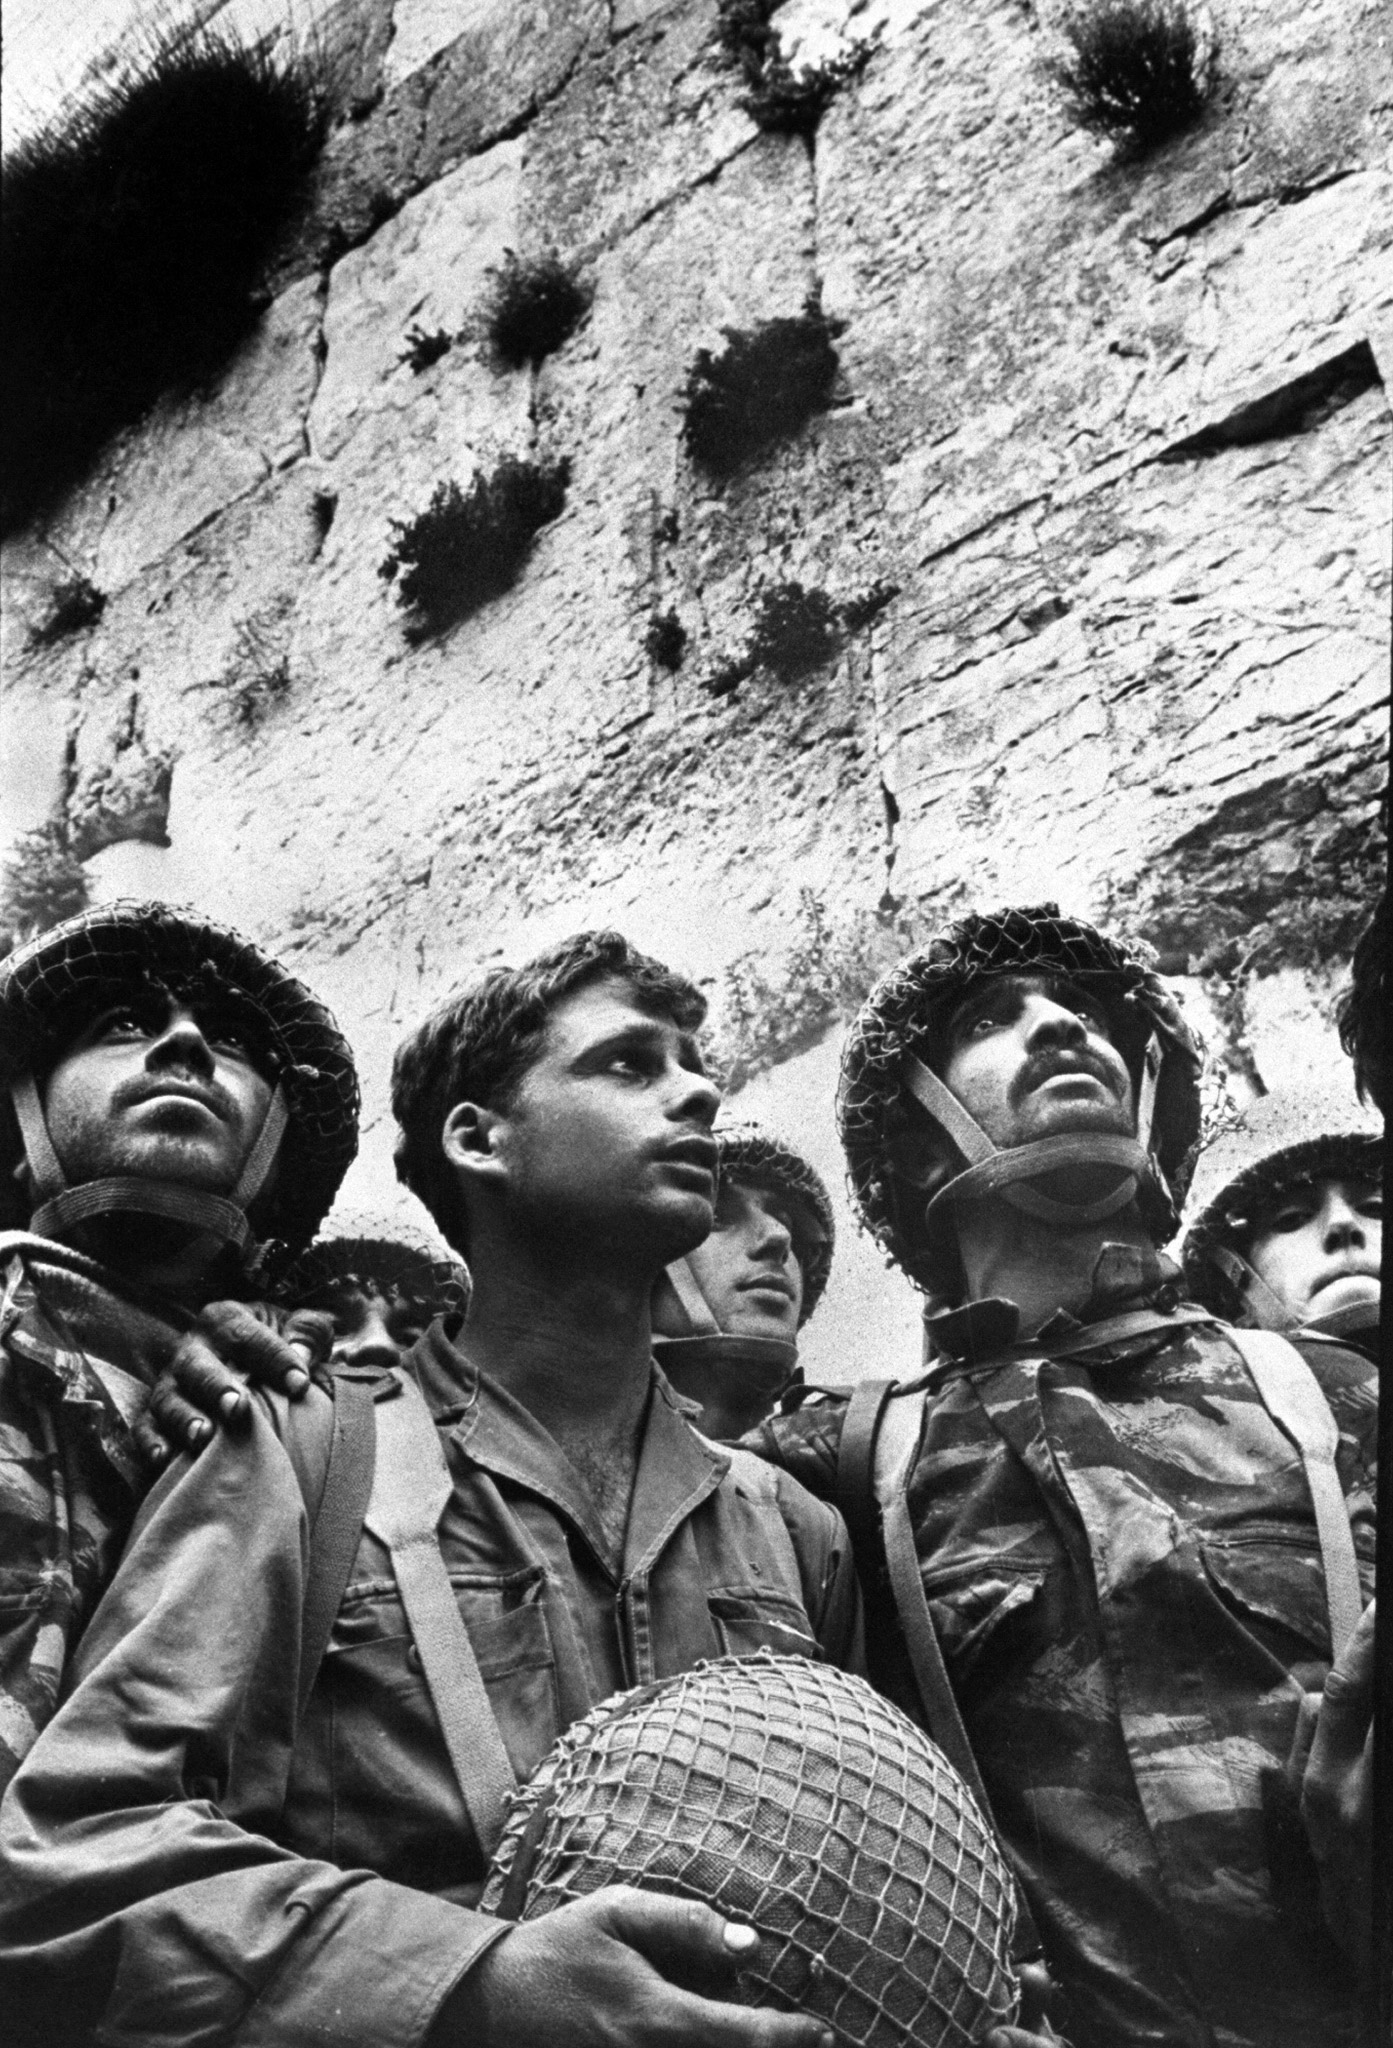 Small group of Israeli soldiers at the wailing wall after it was recaptured during the 1967 war. (David Rubinger/The LIFE Images Collection/Getty Images)